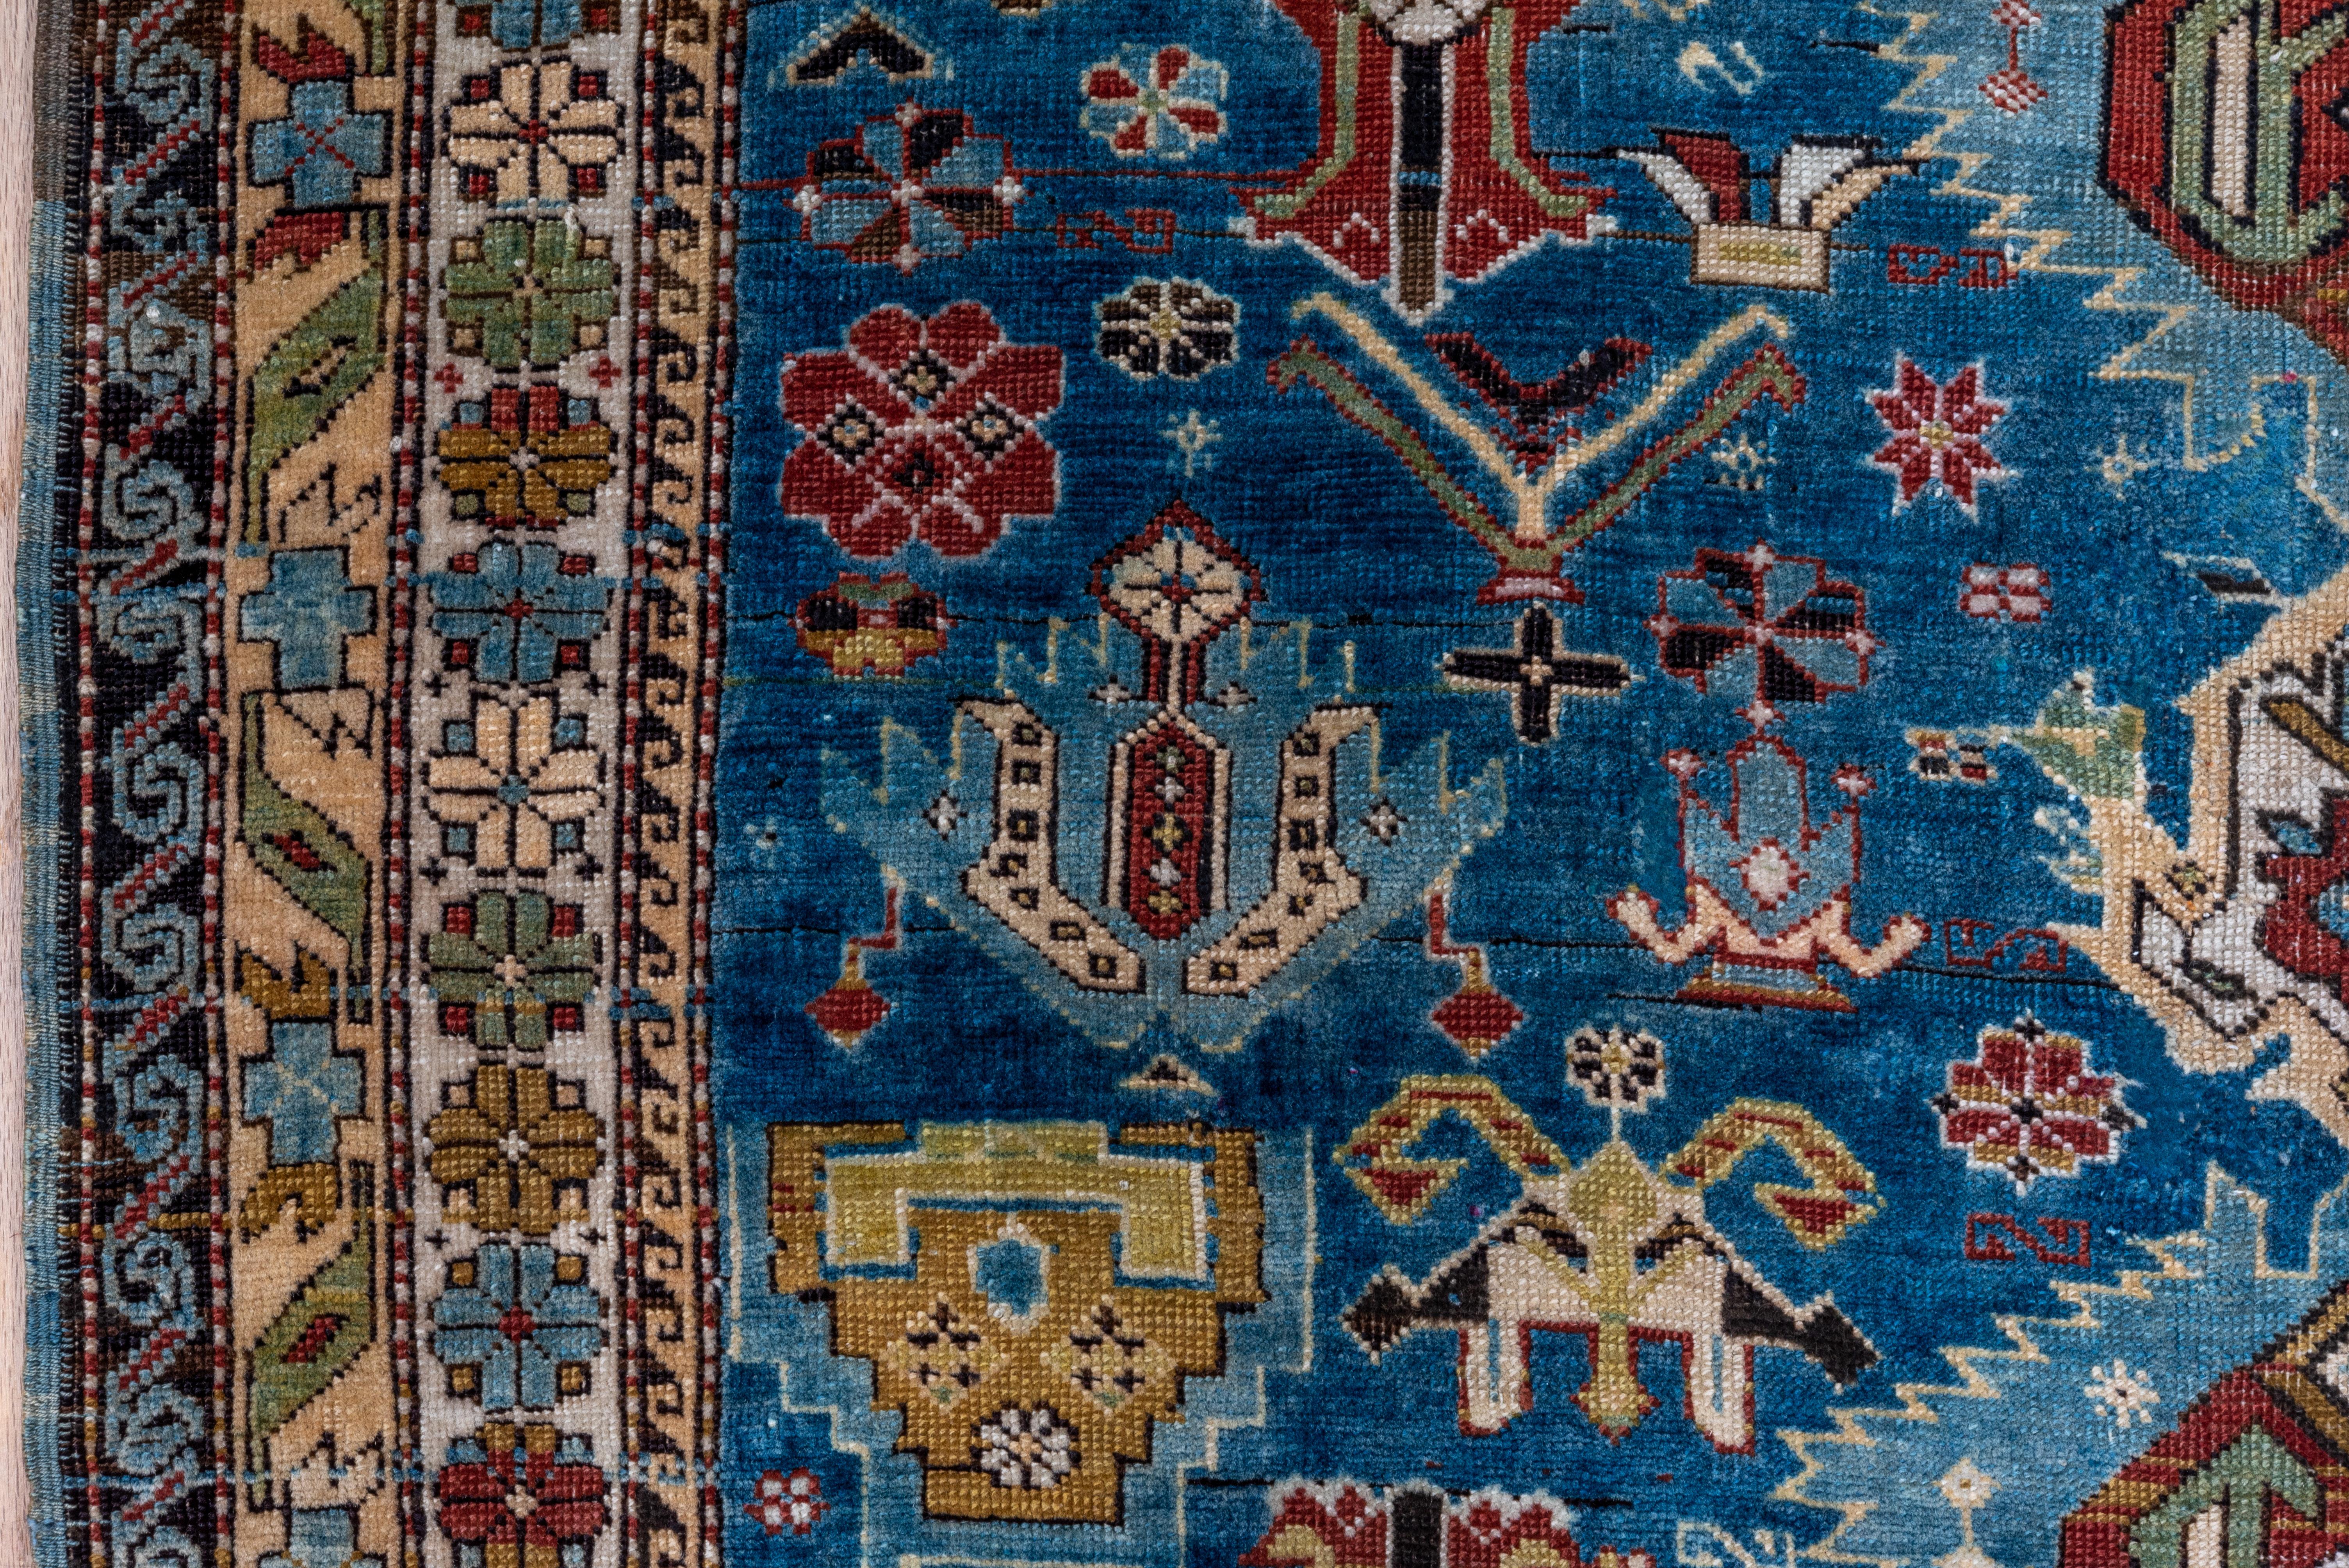 Early 20th Century Rare and Fine Antique Caucasian Kuba Area Rug, Mint Condition, Bright Blue Field For Sale